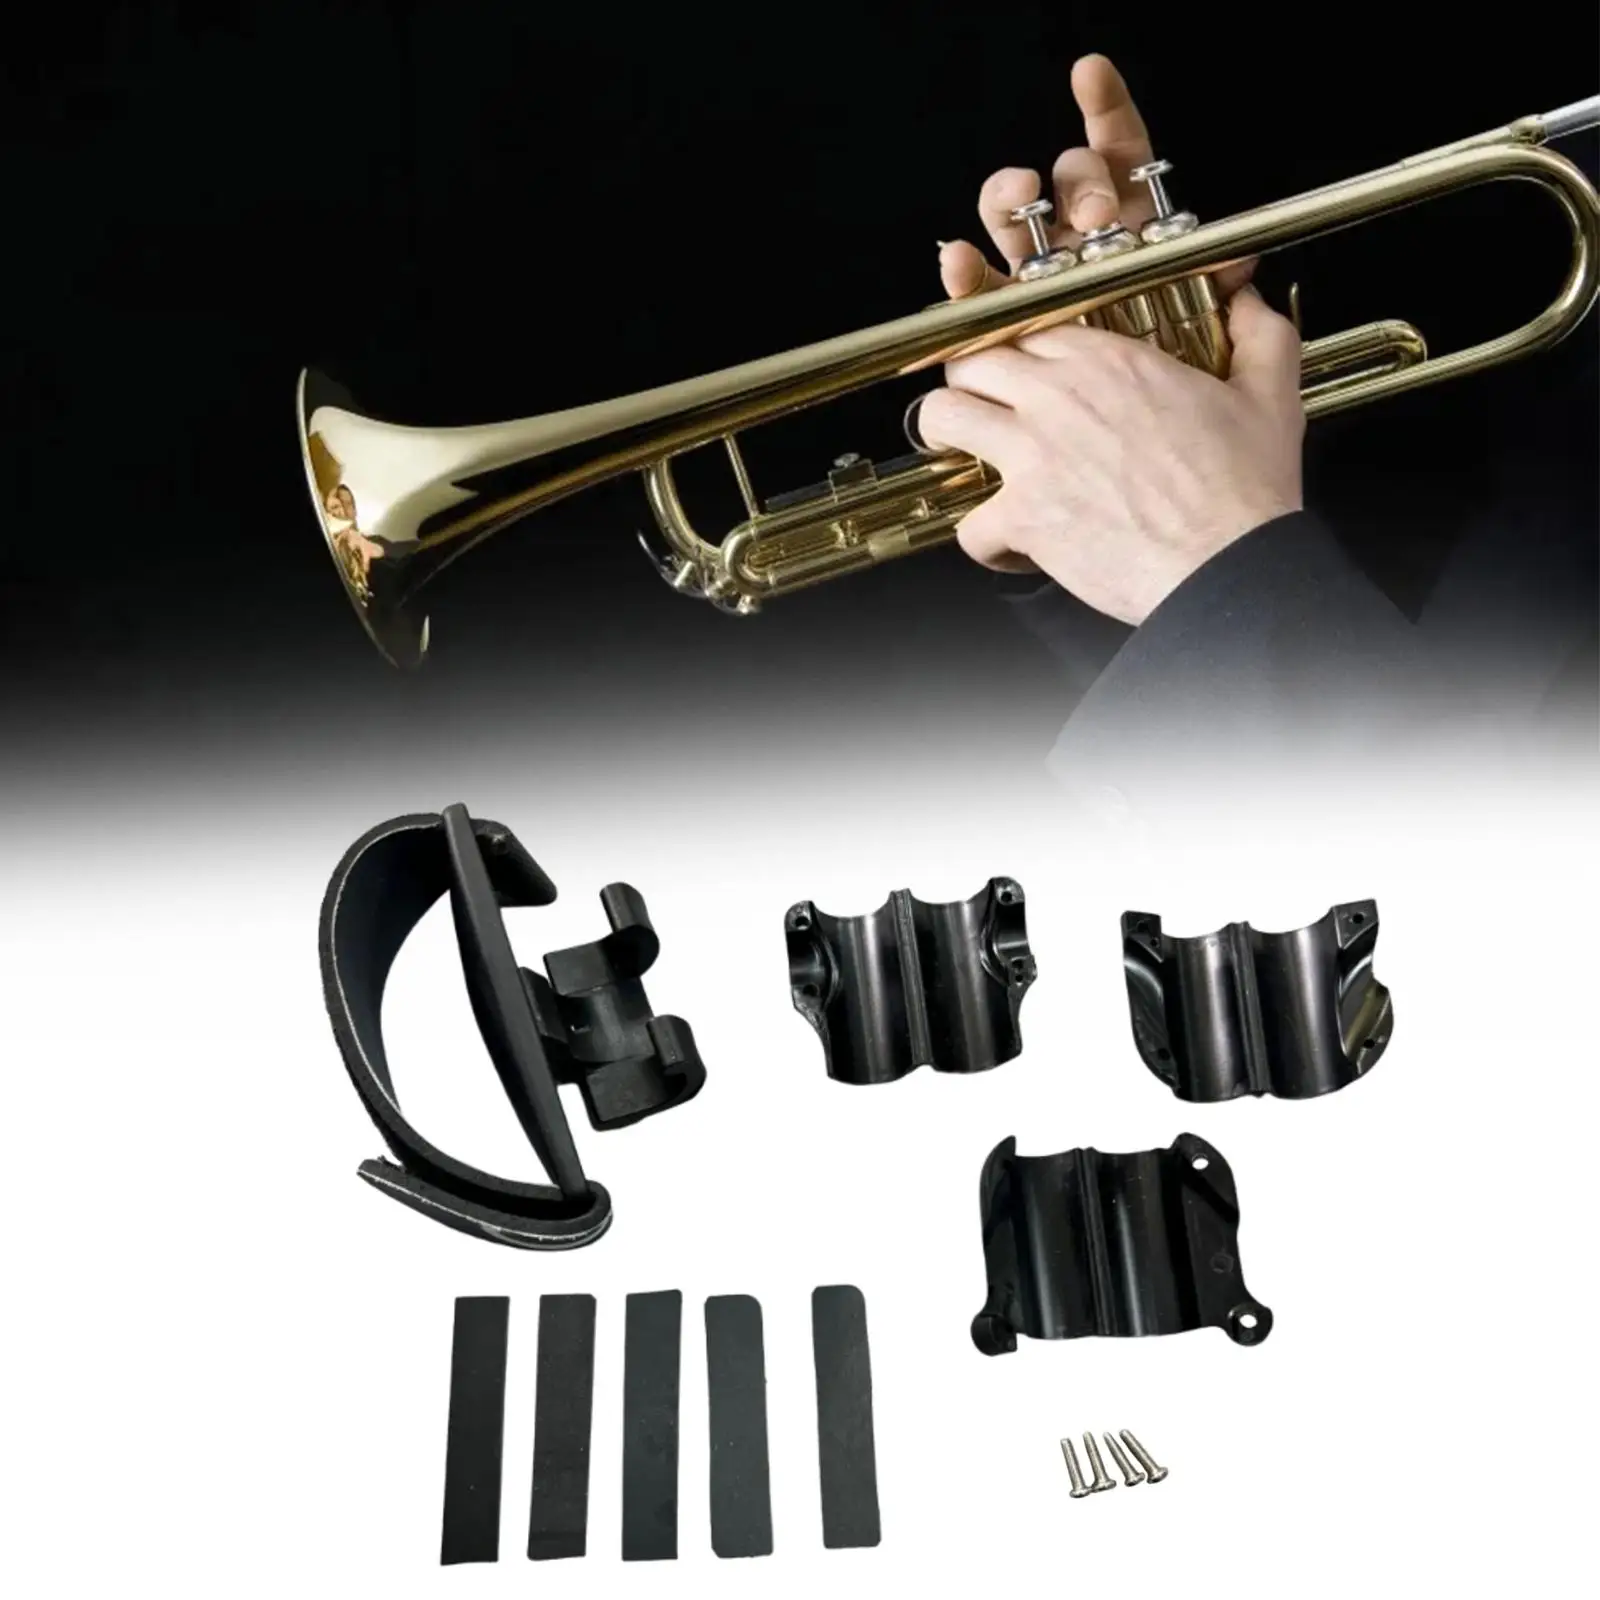 Trombone Grip with Screws and Straps Musician Gifts Can Balance The Instrument